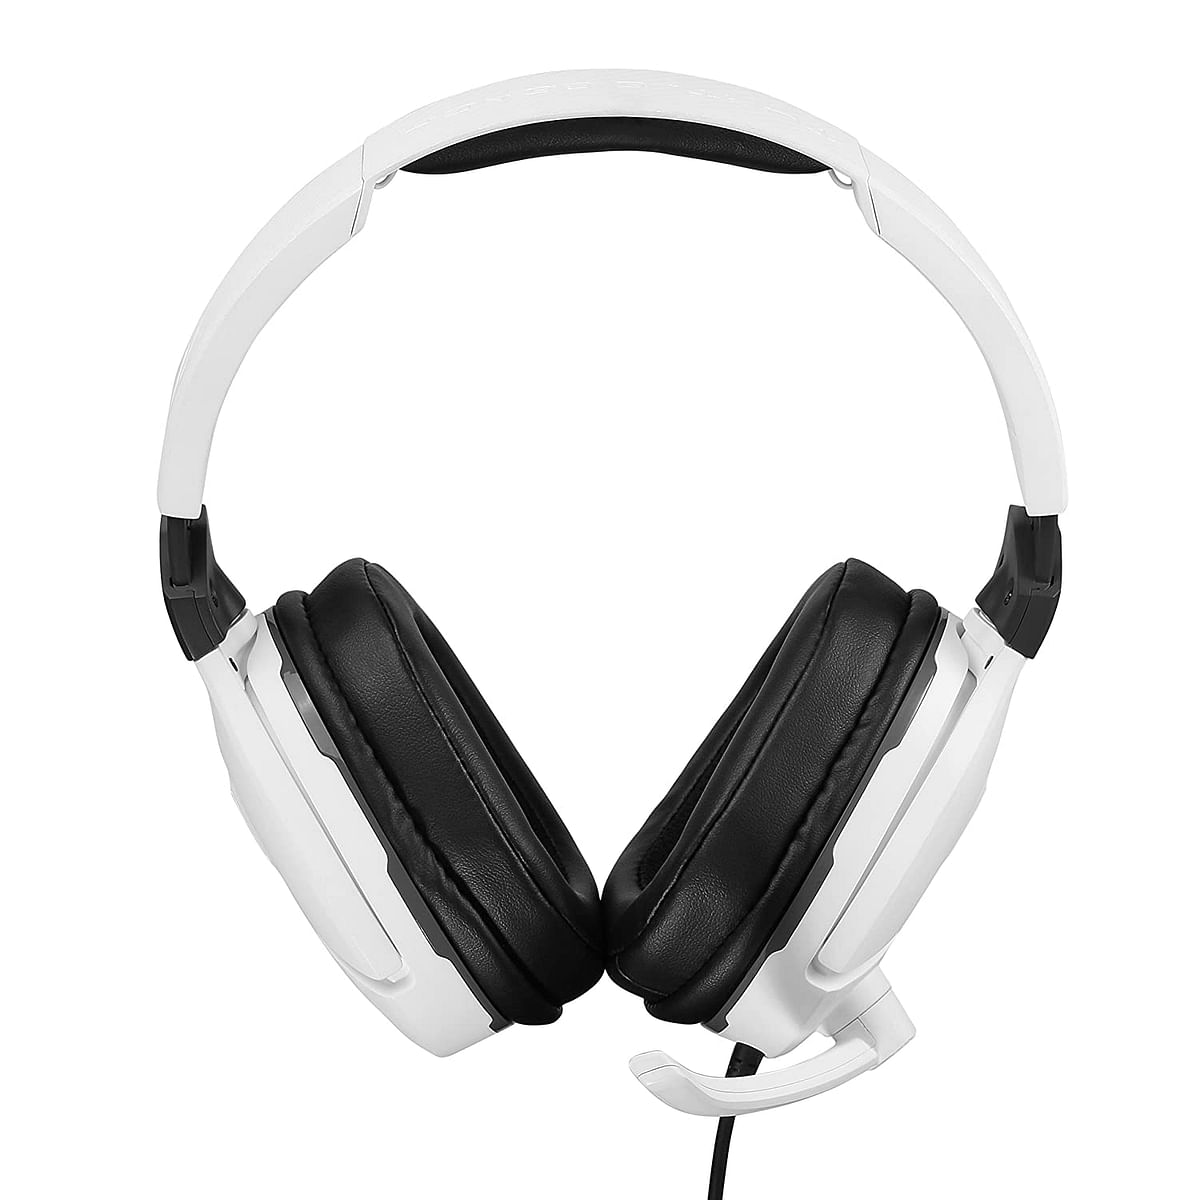 TURTLE BEACH Ear Force Recon 200 White (Xbox One)